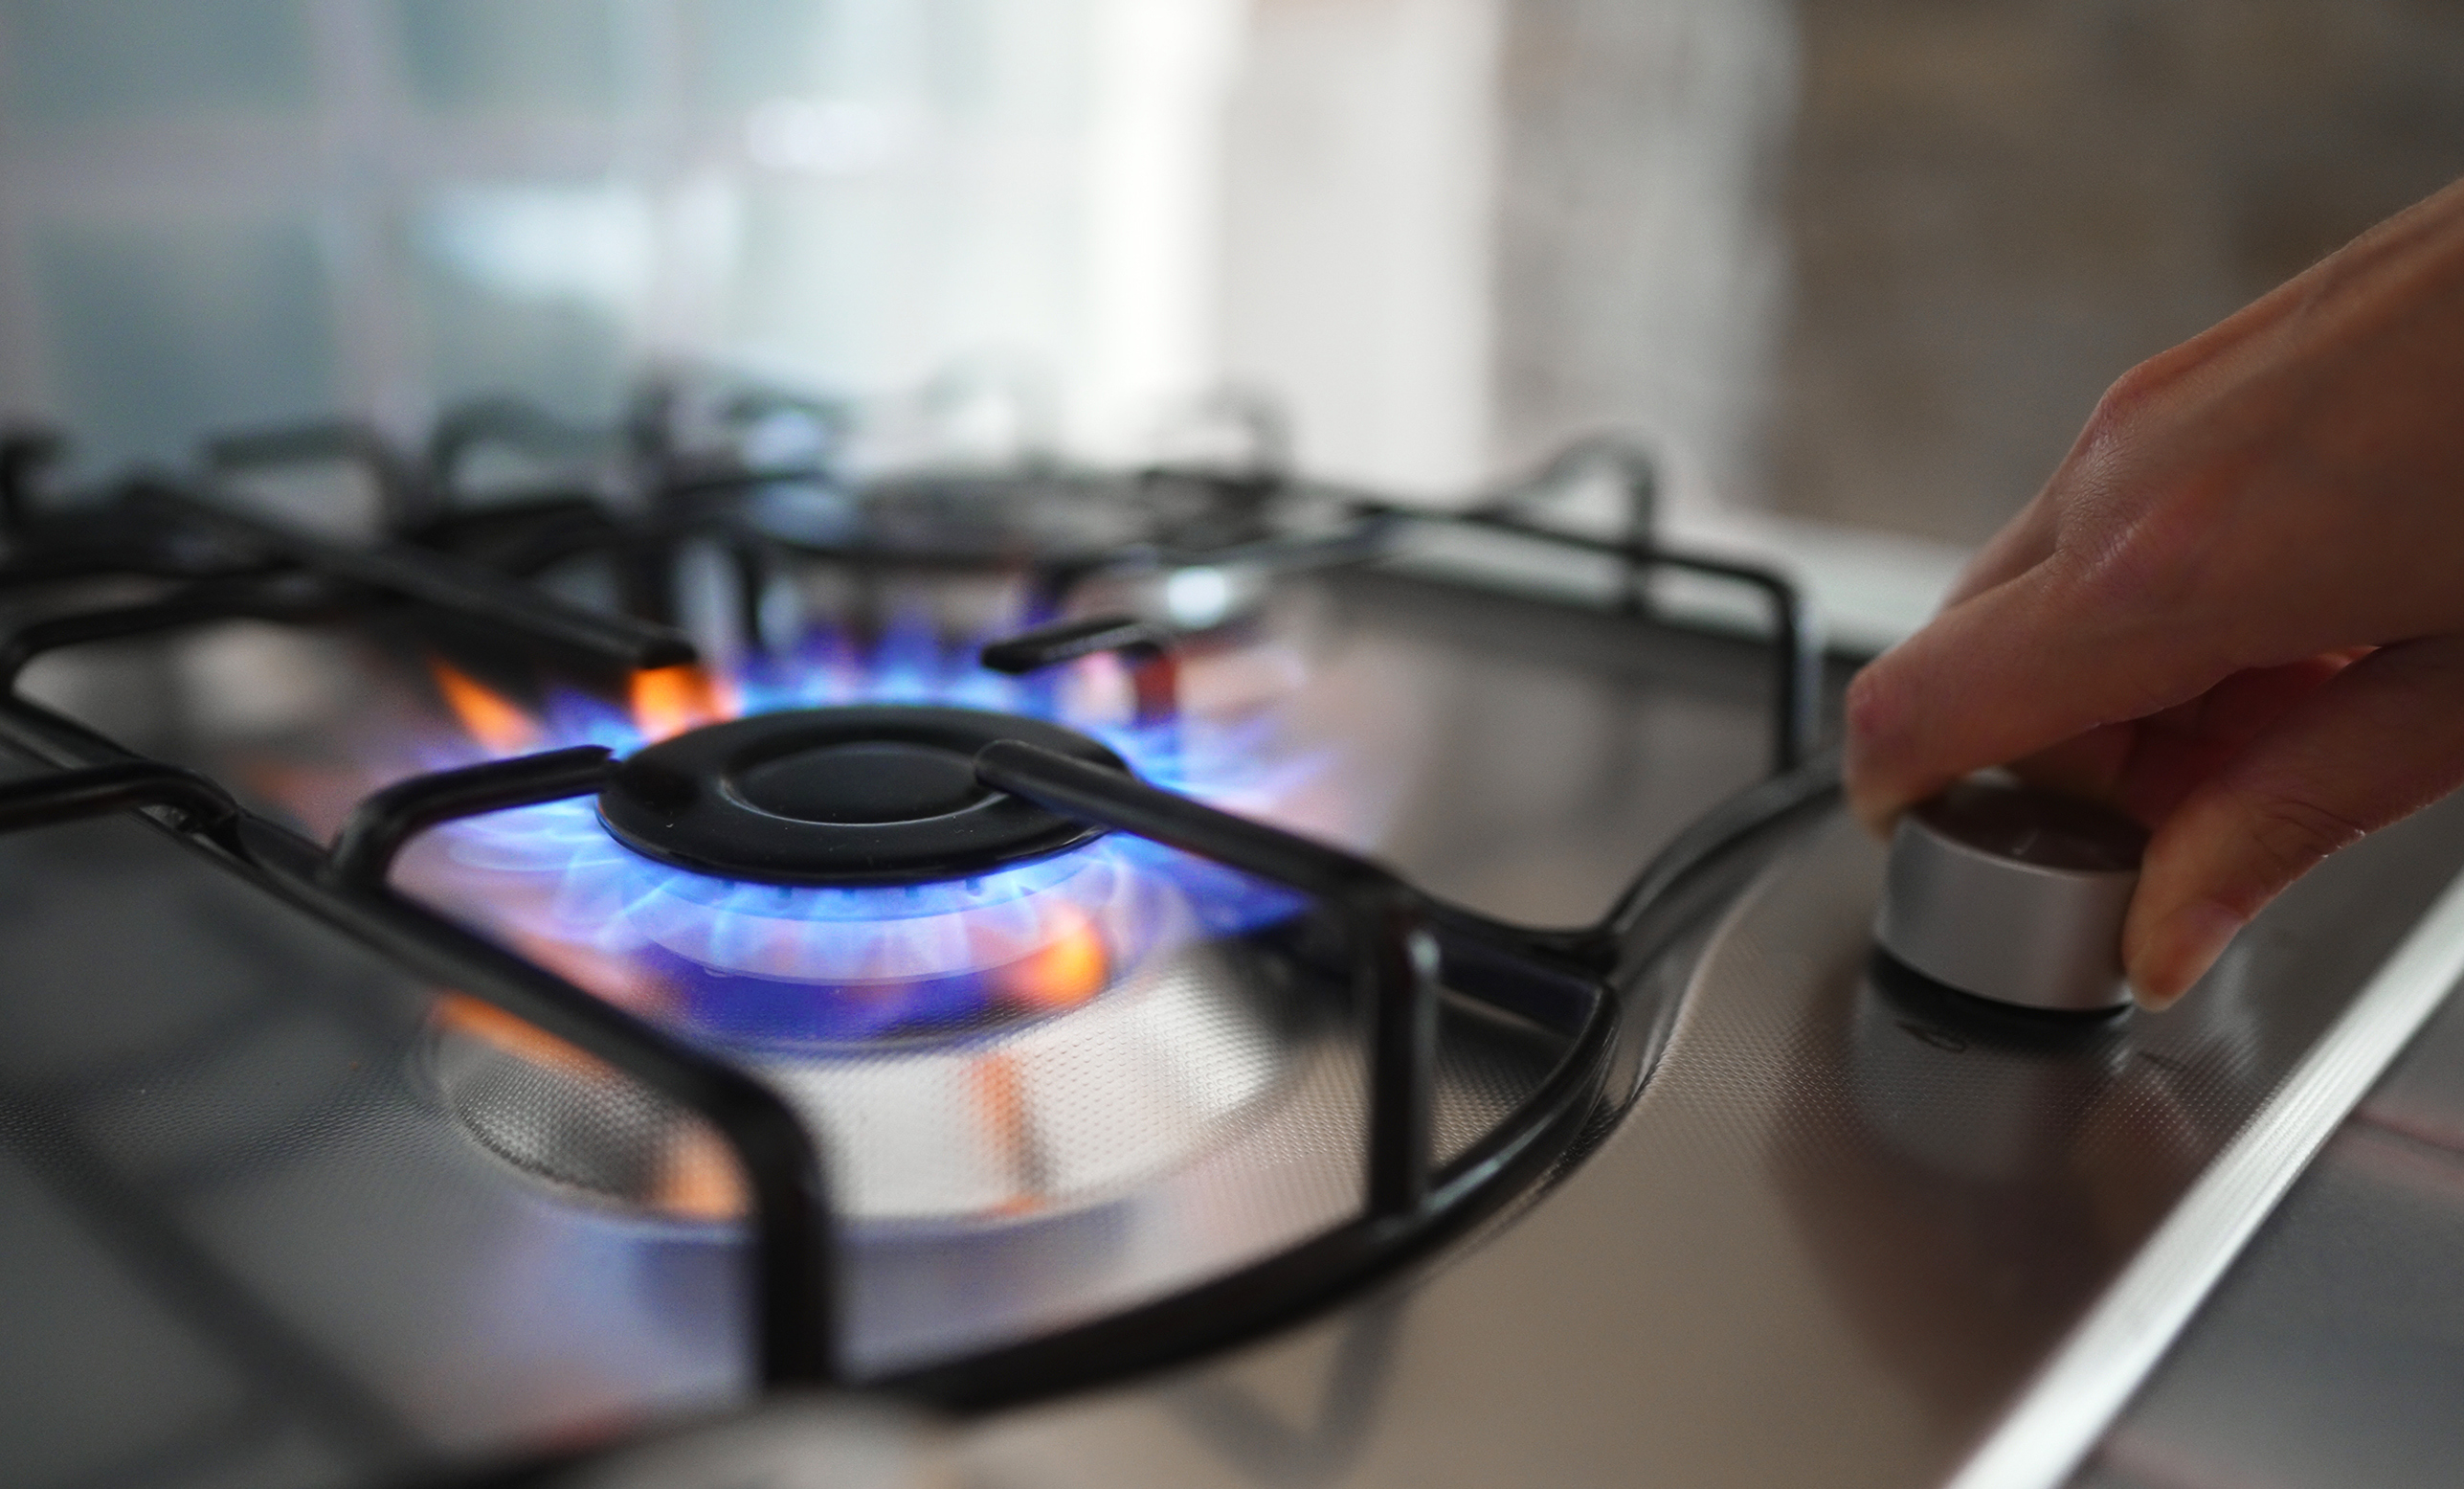 Person adjusting a gas stove burner with a blue flame